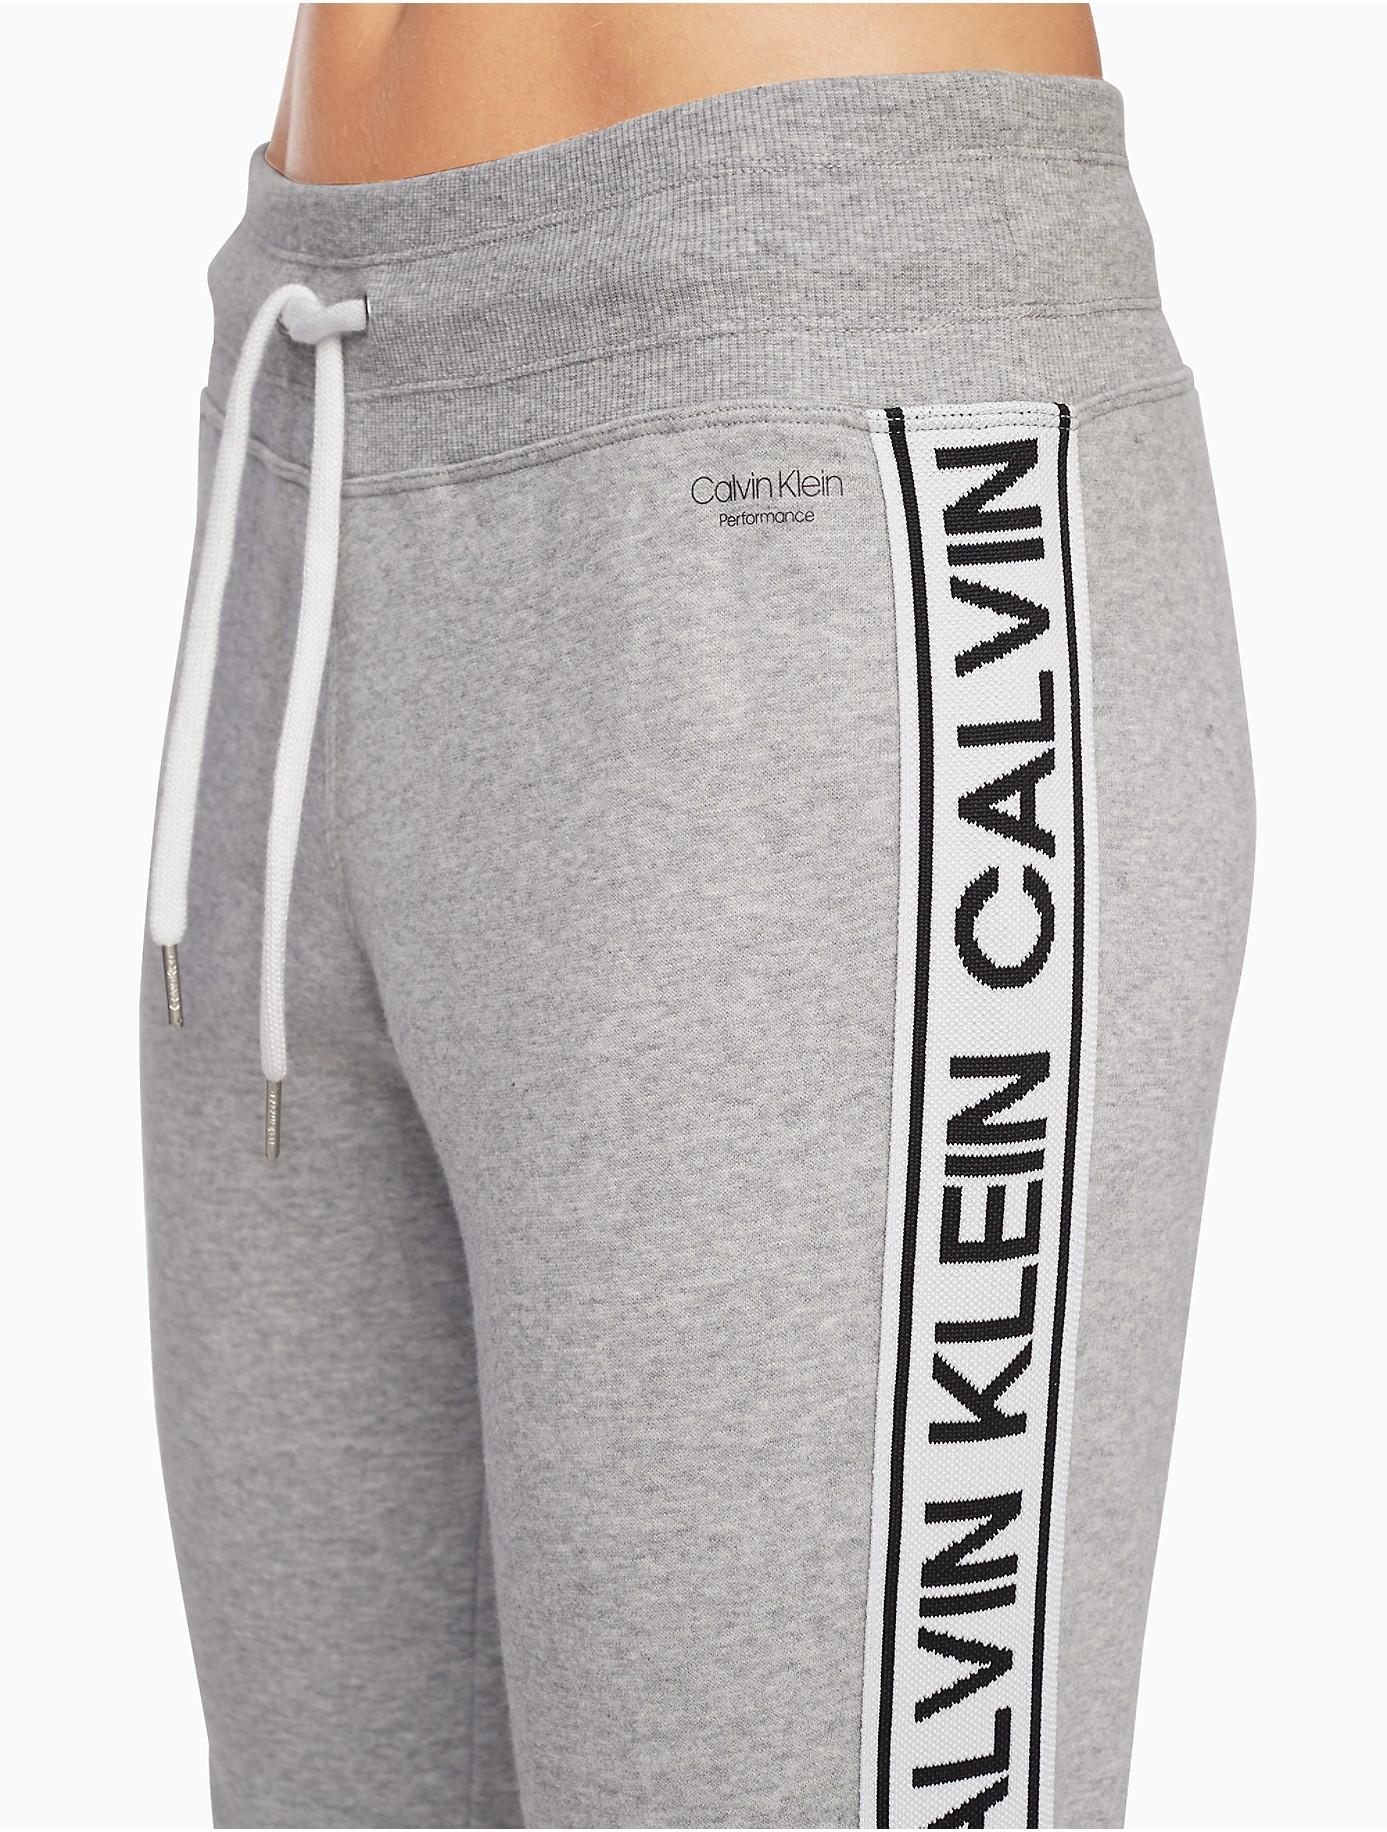 Calvin Klein Cotton Performance Logo Tape Drawstring Joggers in Pearl Grey  Heather (Gray) | Lyst